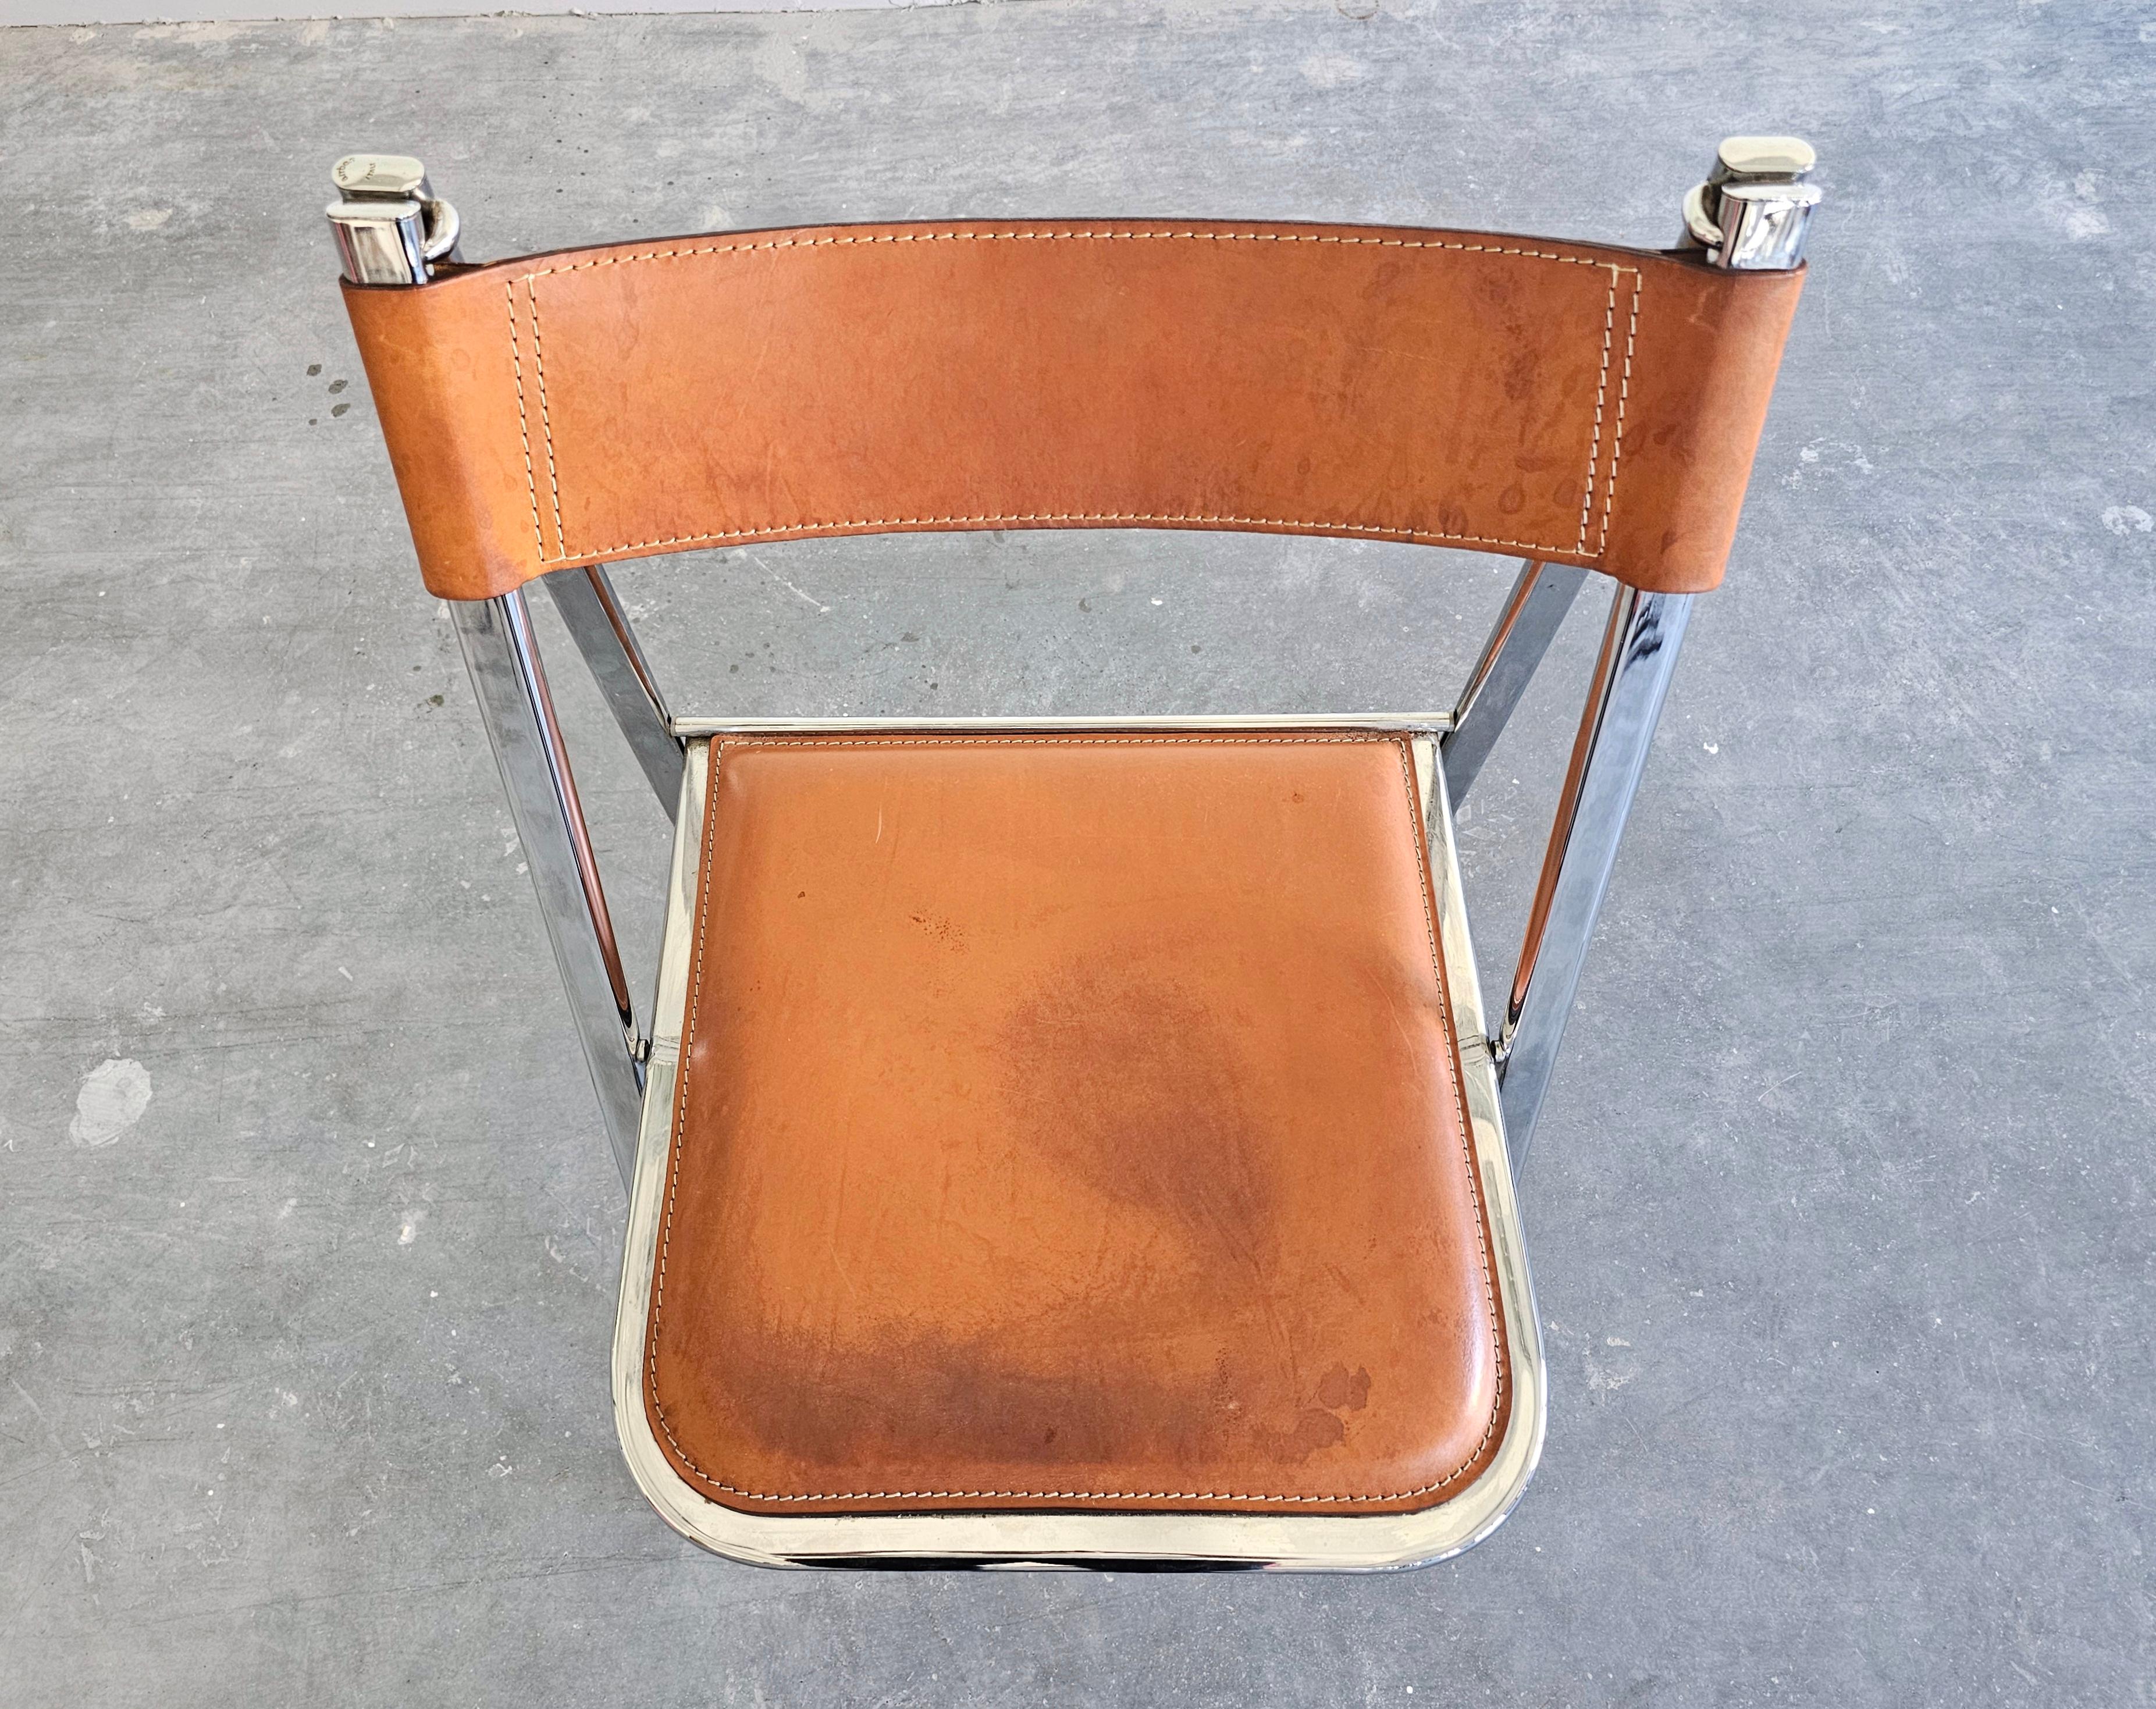 Pair of Folding Chairs by Arrben, model Tamara, in cognac leather, Italy 1970s For Sale 3